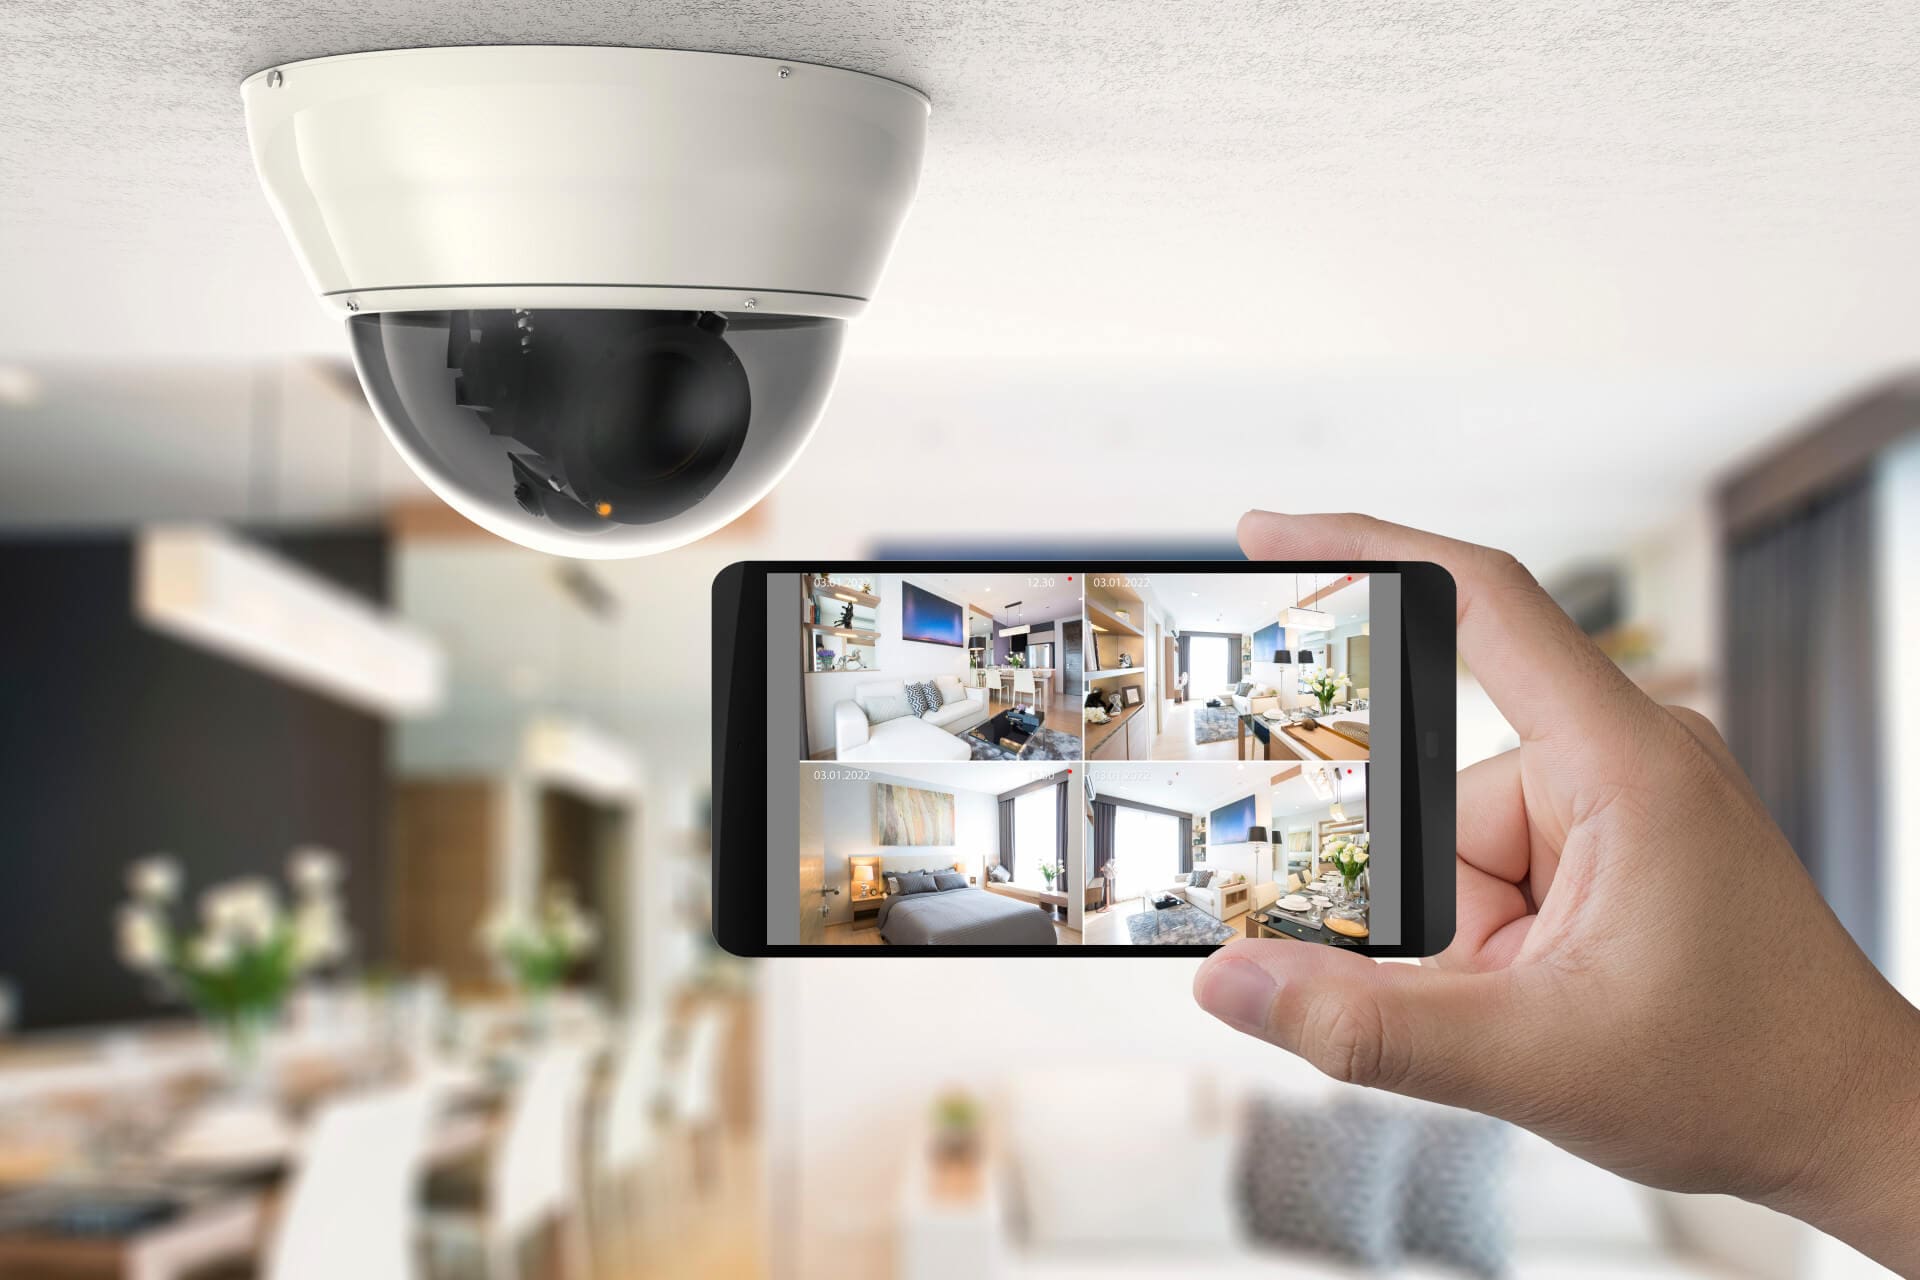 31.19 Cameras and Video Surveillance - Smart Security Solutions